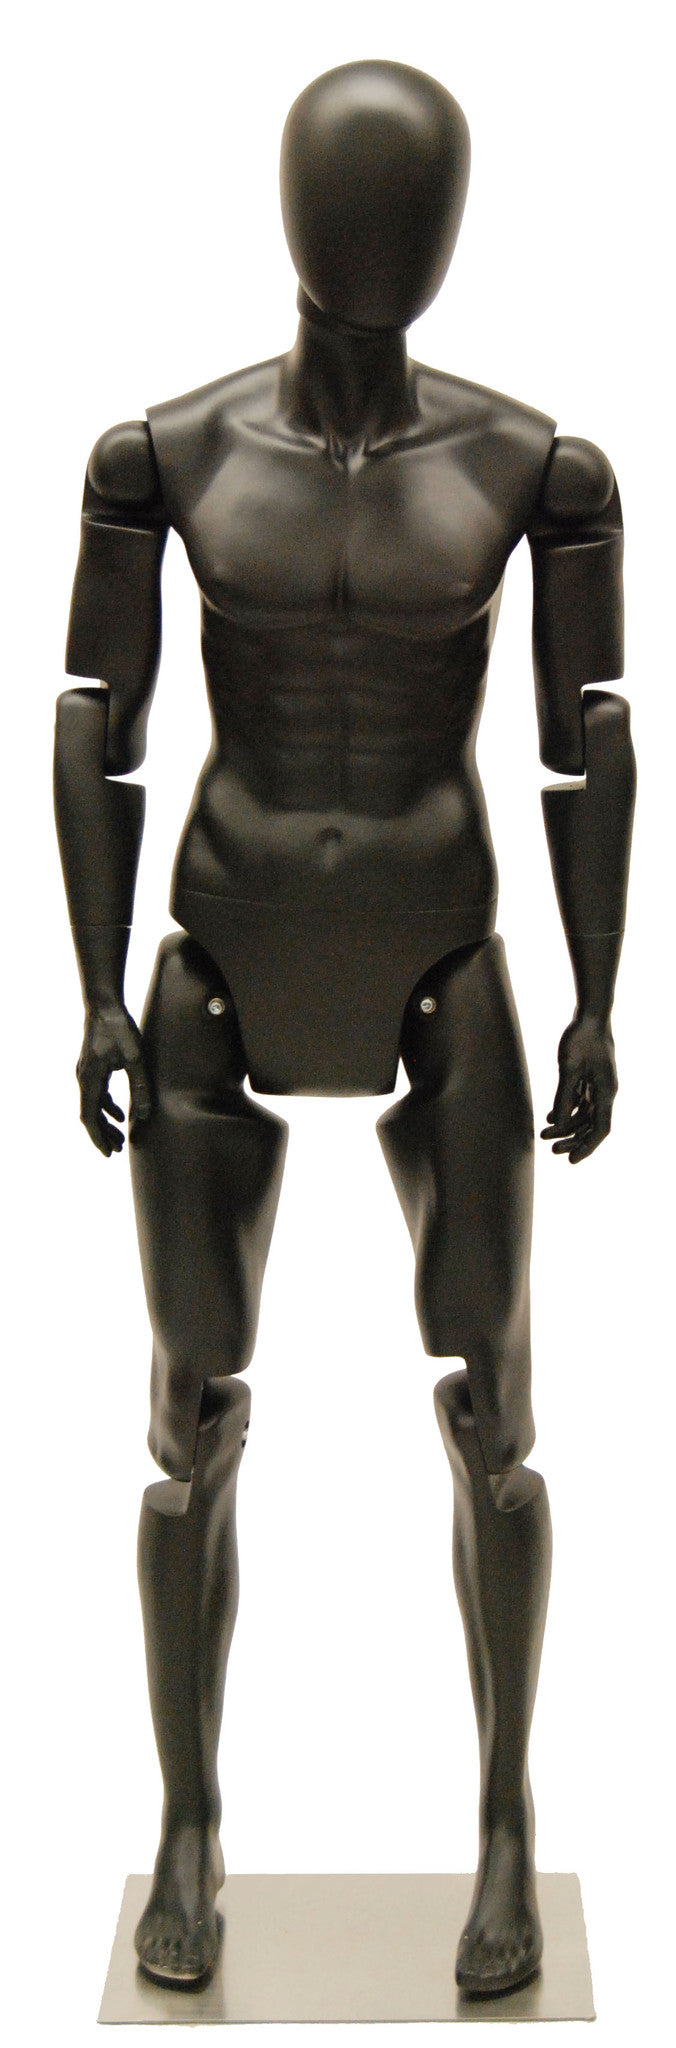 Articulated Egghead Male Mannequin #1: Black